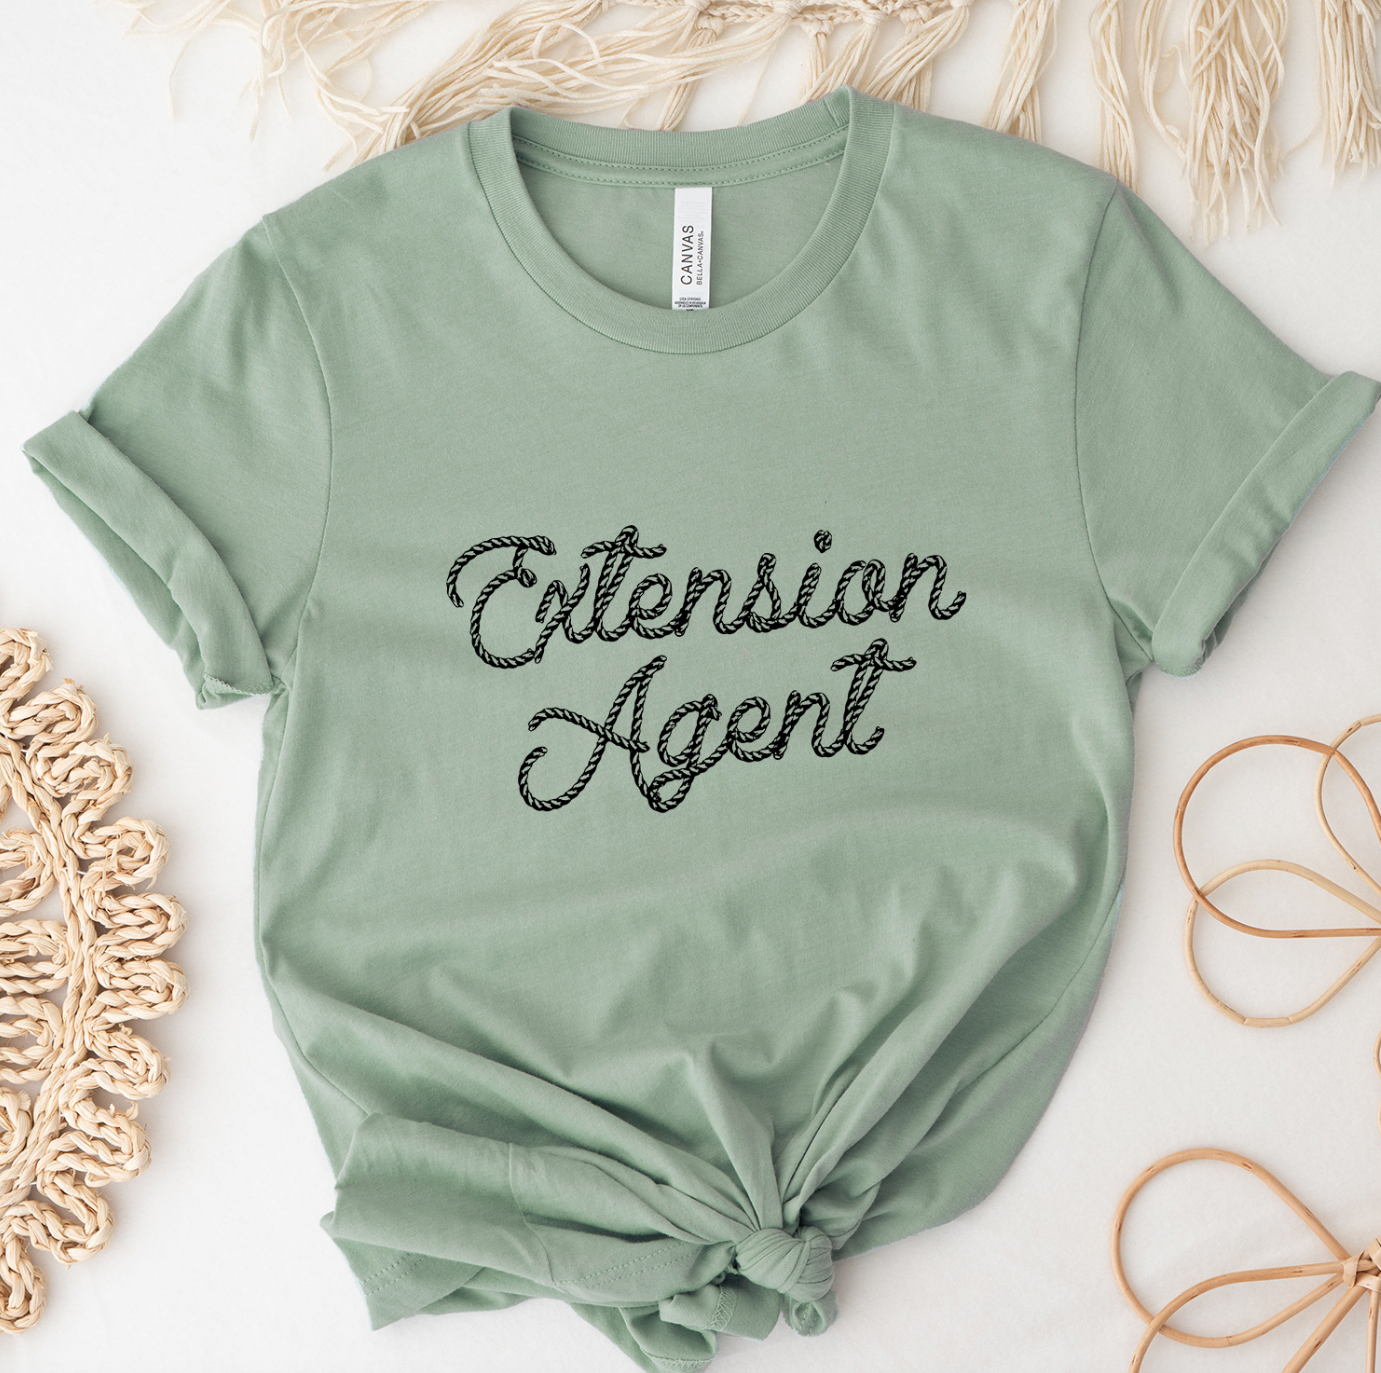 Rope Extension Agent T-Shirt (XS-4XL) - Multiple Colors!